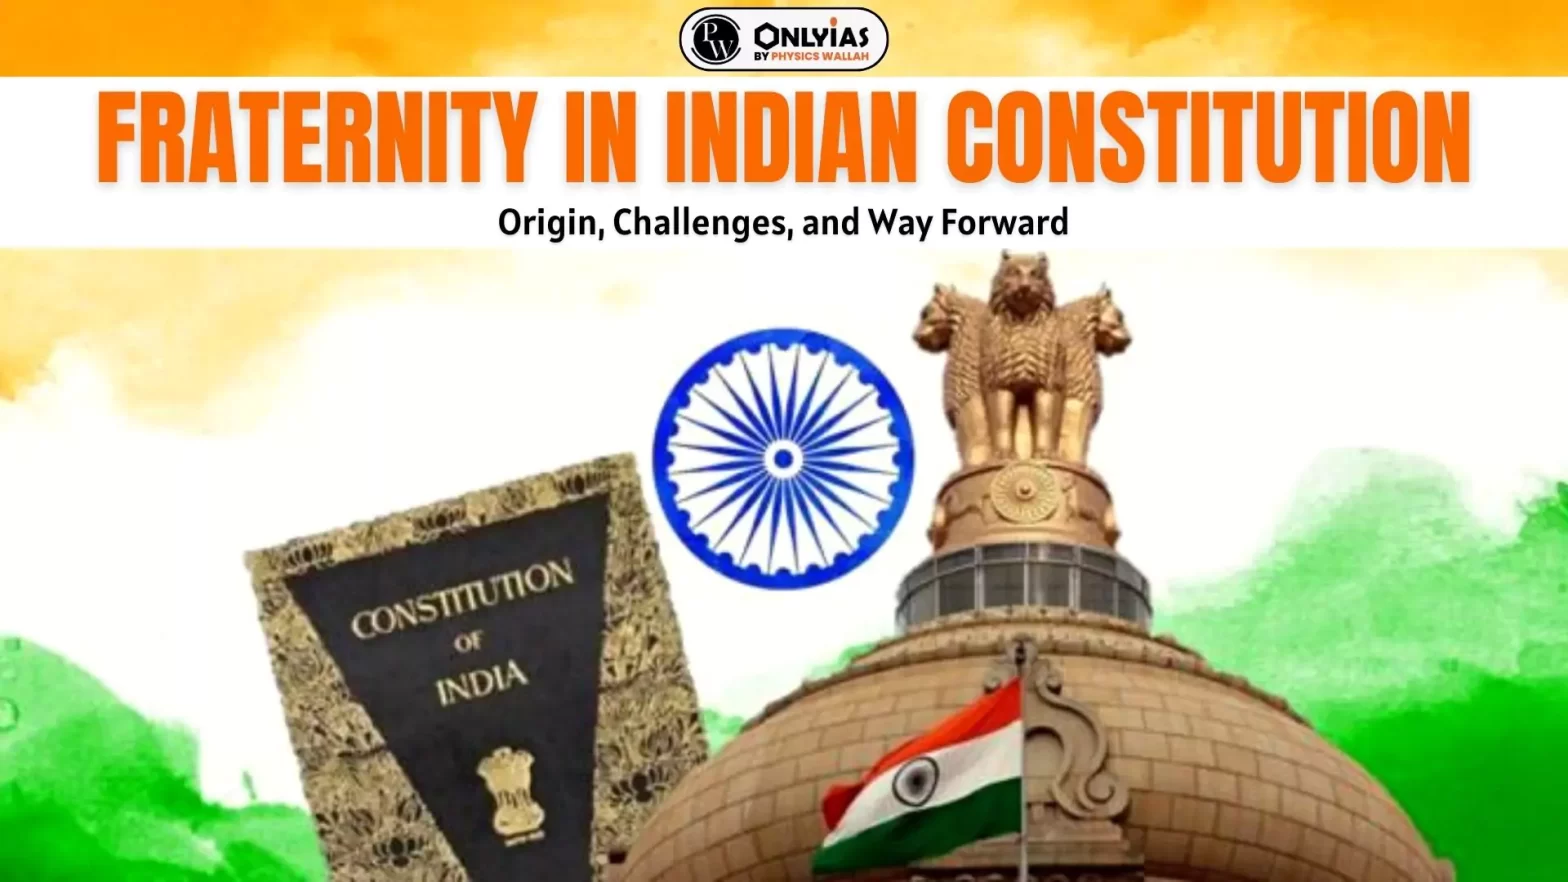 Fraternity in Indian Constitution: Origin, Challenges, and Way Forward